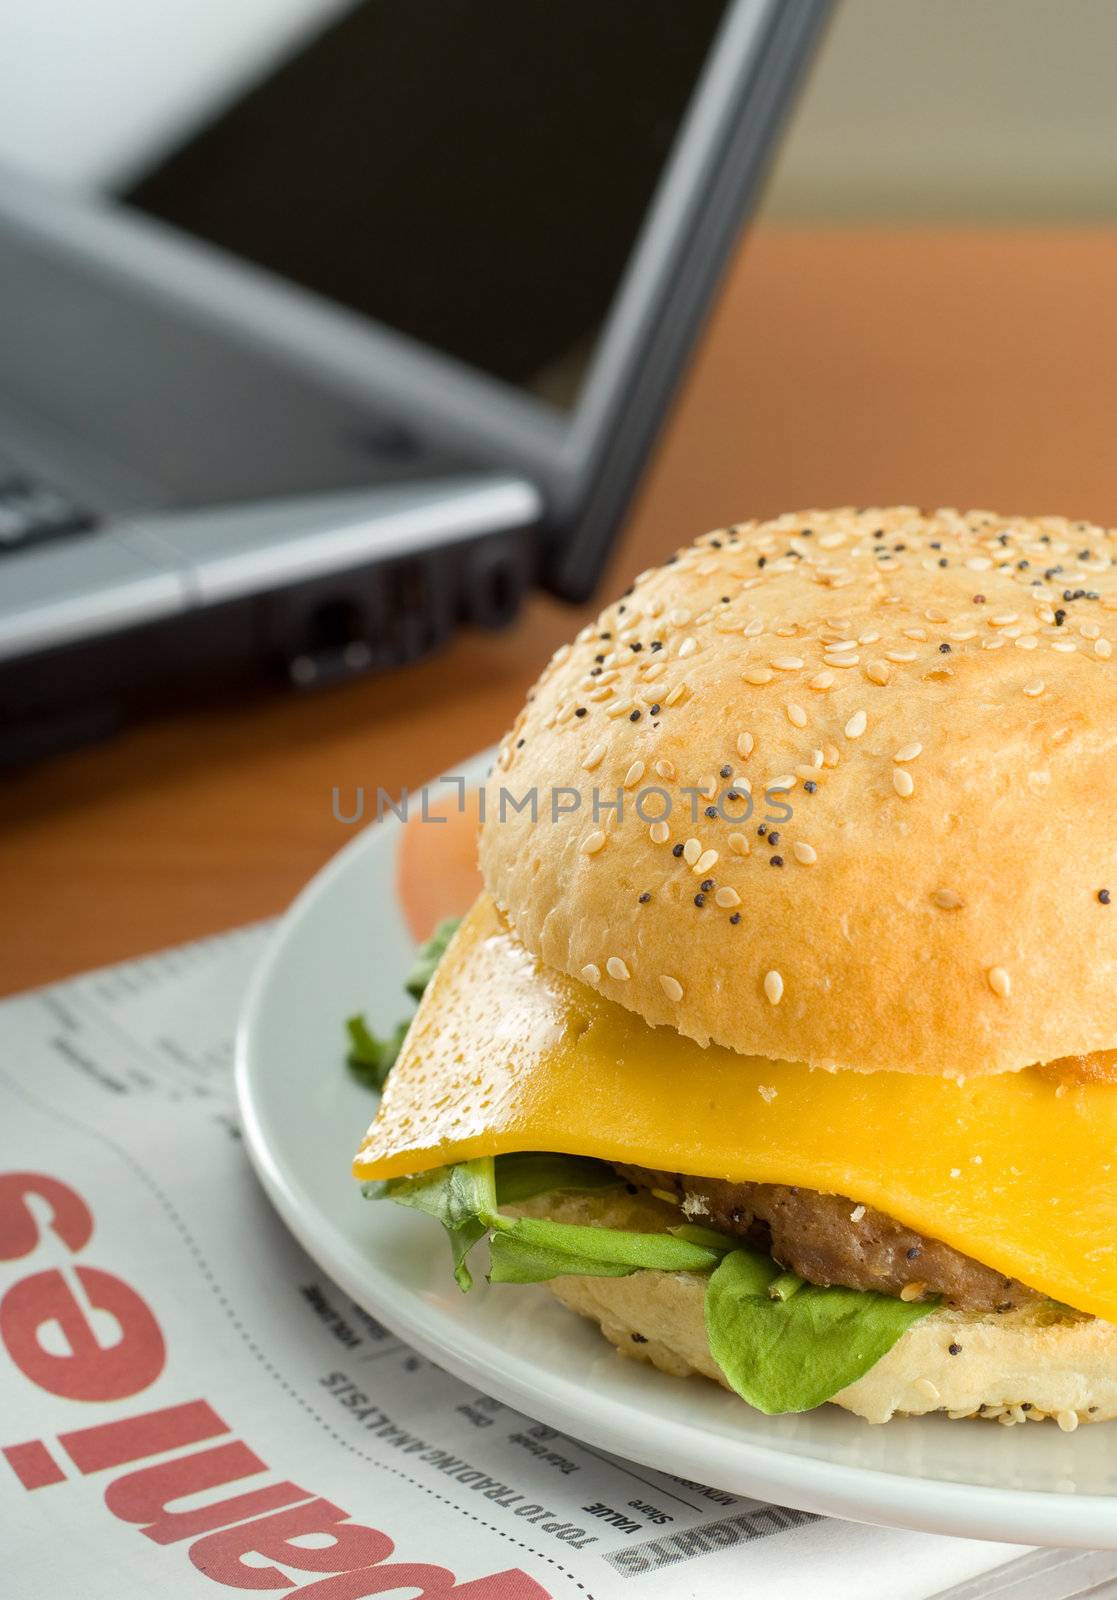 Hamburger and laptop by alistaircotton